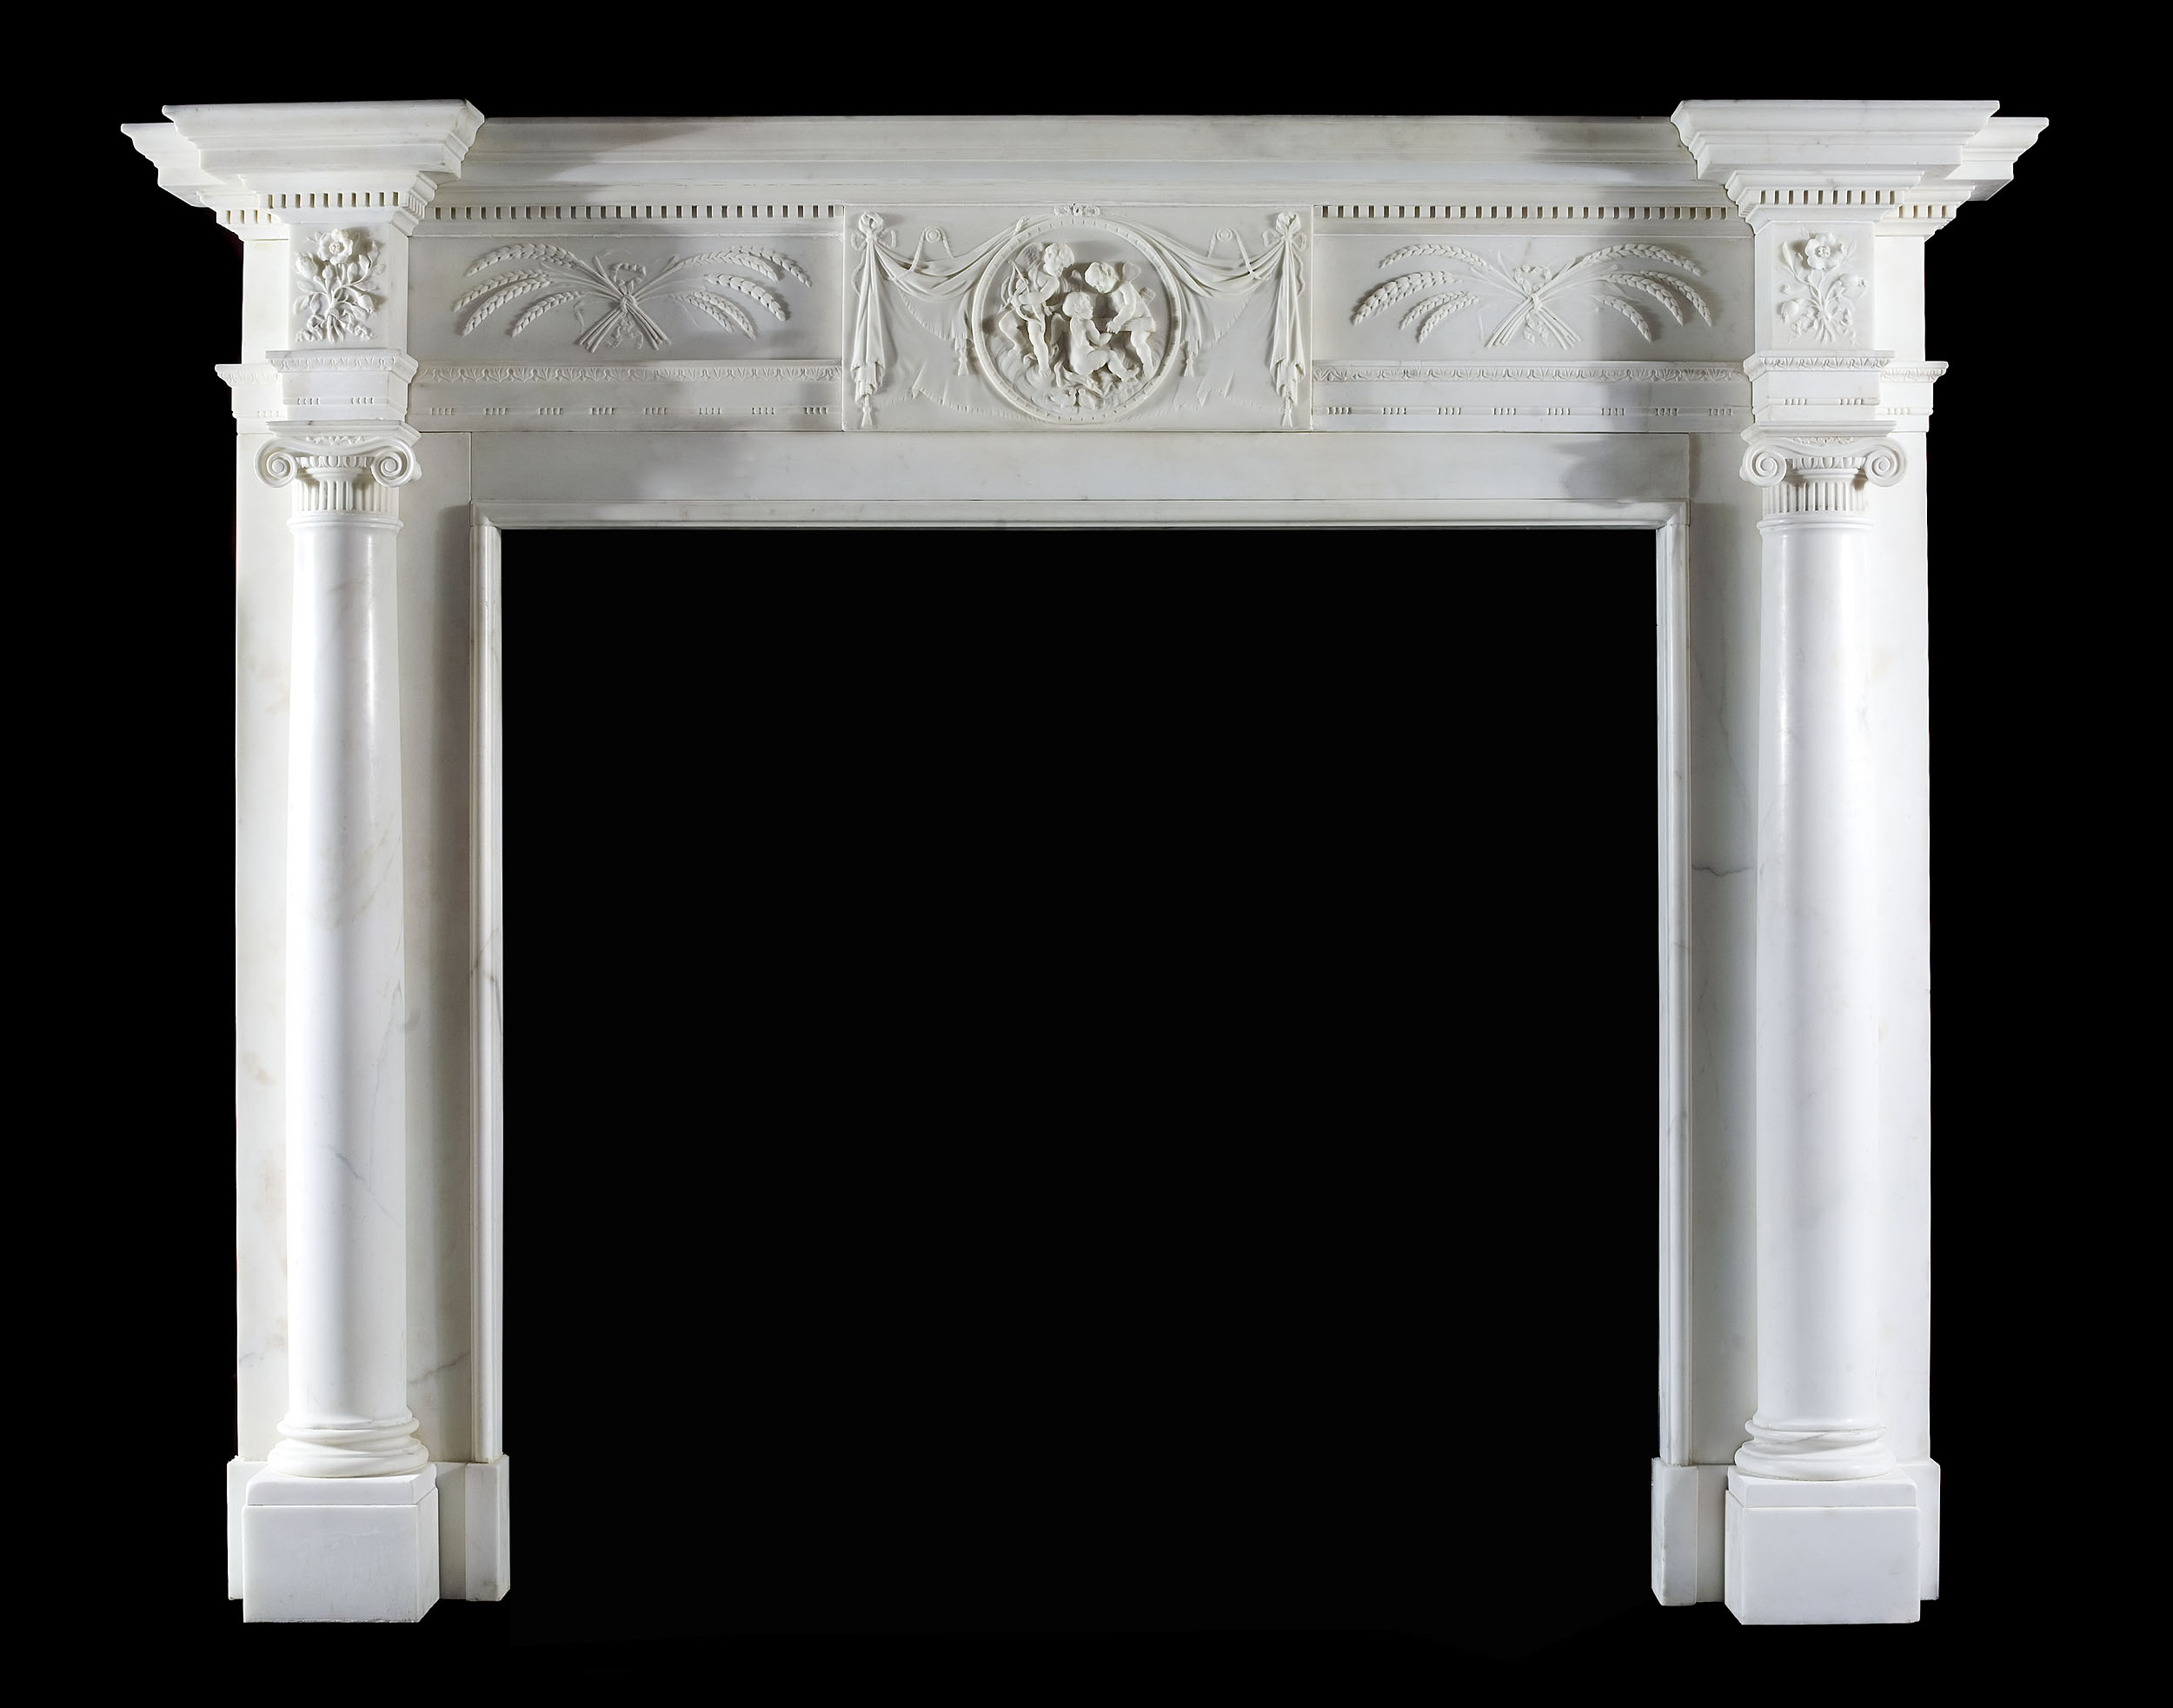 A stunning 18th century Marble Columned antique Chimneypiece 
